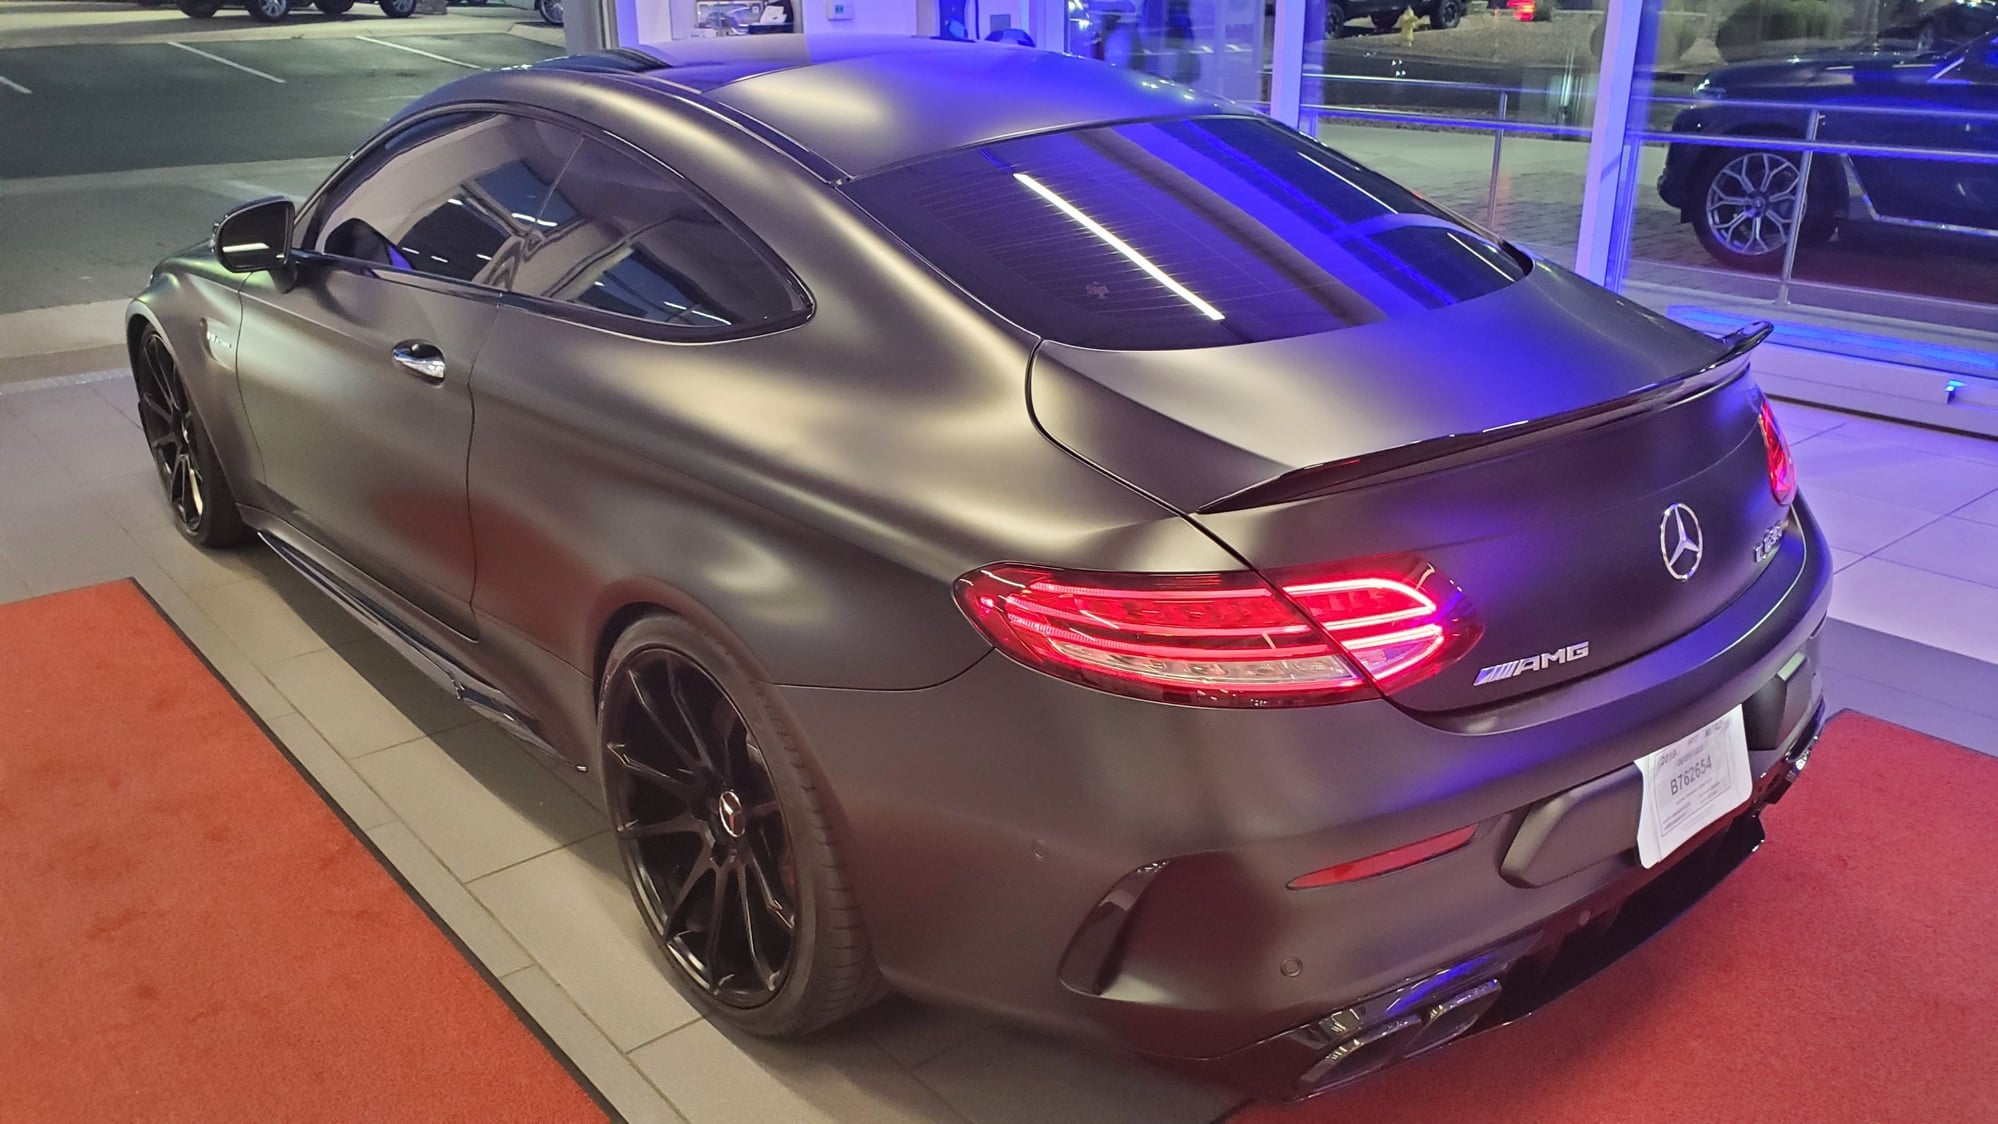 2019 Mercedes-Benz C63 AMG S - 2019 AMG C63 S coupe with Pure 1000s - Used - VIN WDDWJ8HB1KF843870 - 16,049 Miles - 8 cyl - 2WD - Automatic - Coupe - Gray - Scottsdale, AZ 85251, United States